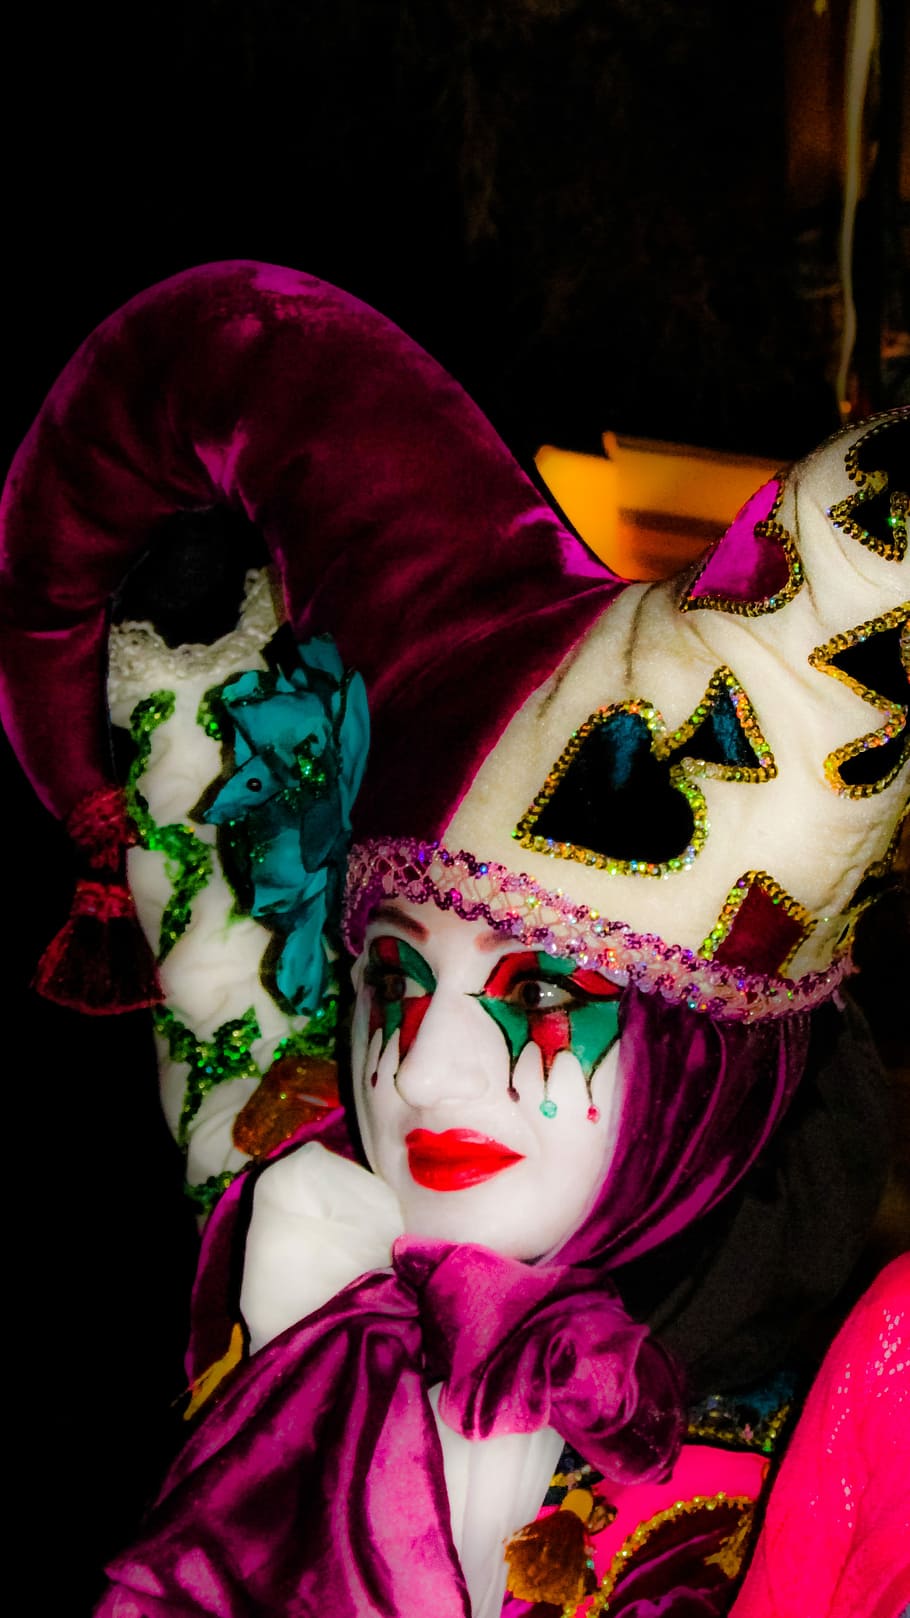 Mask, Make Up, Street Theater, Face, expression, masquerade, harlequin, medieval festival, ayia napa, cyprus